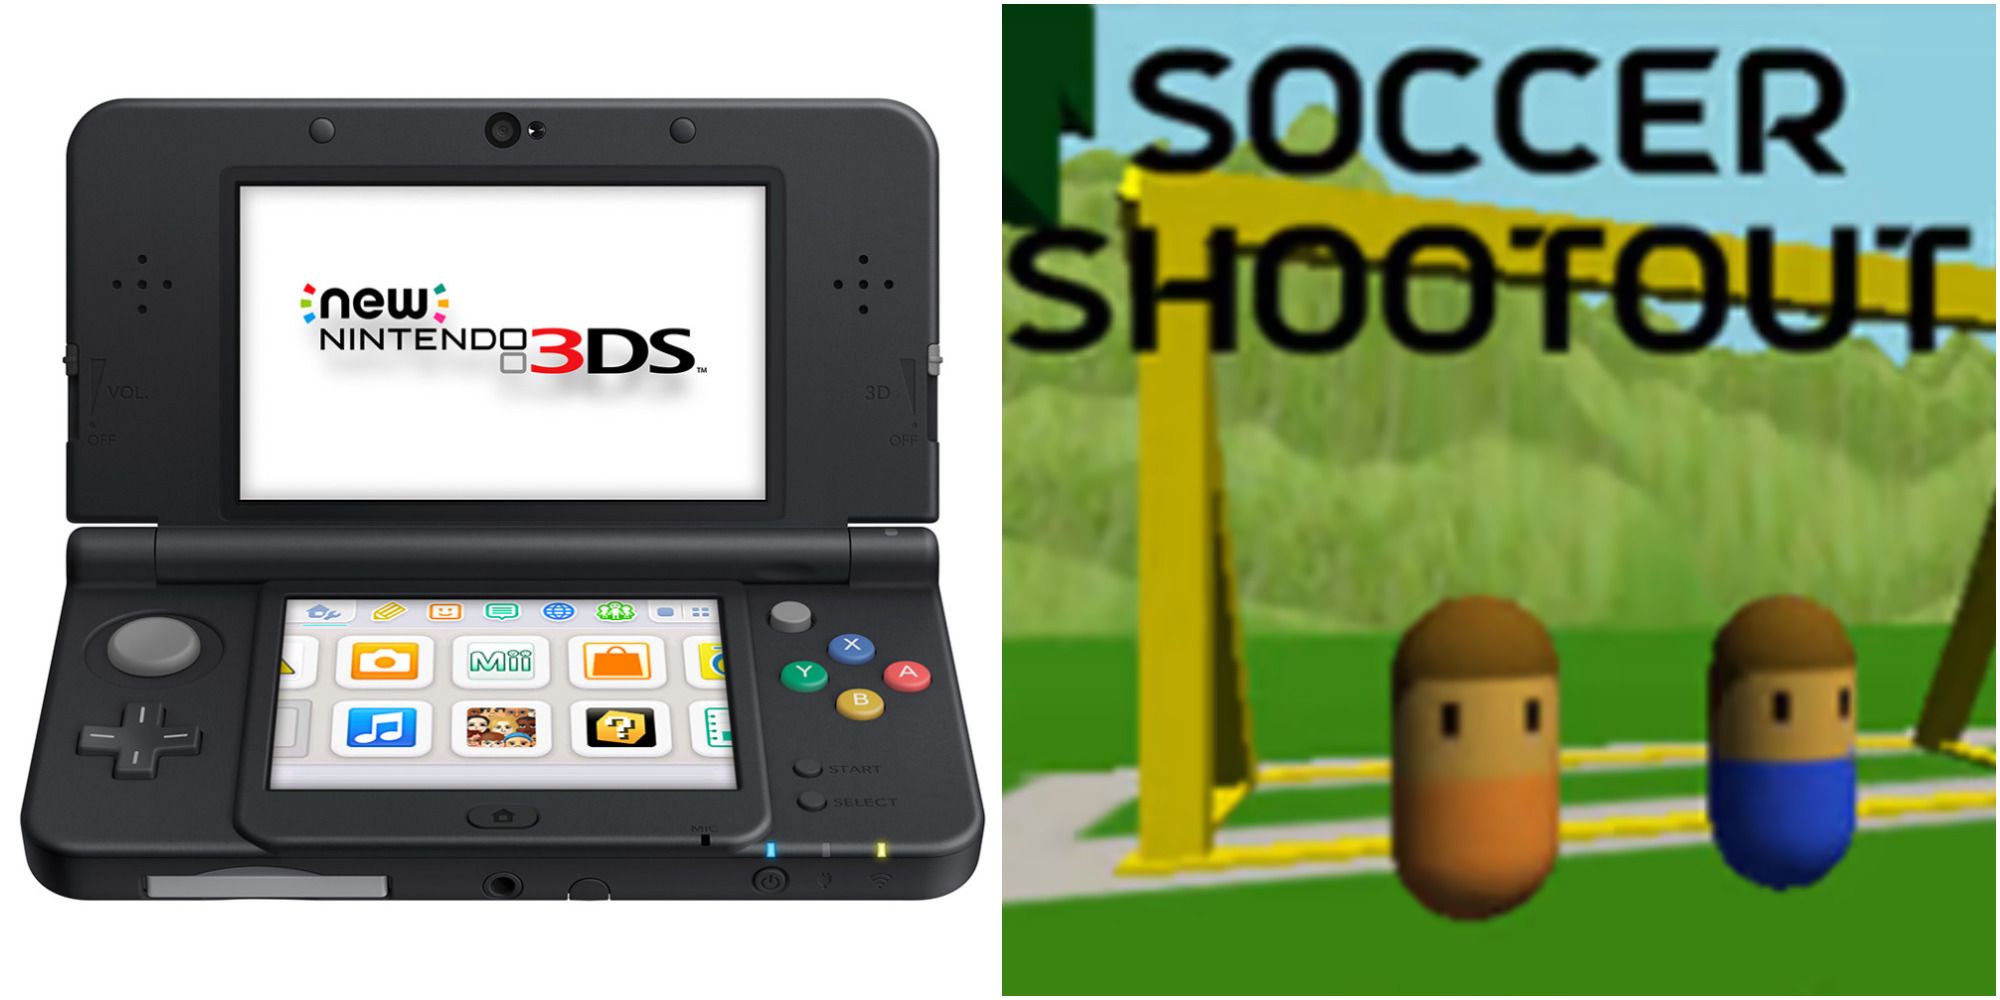 New Nintendo 3DS console & Soccer Shootout game